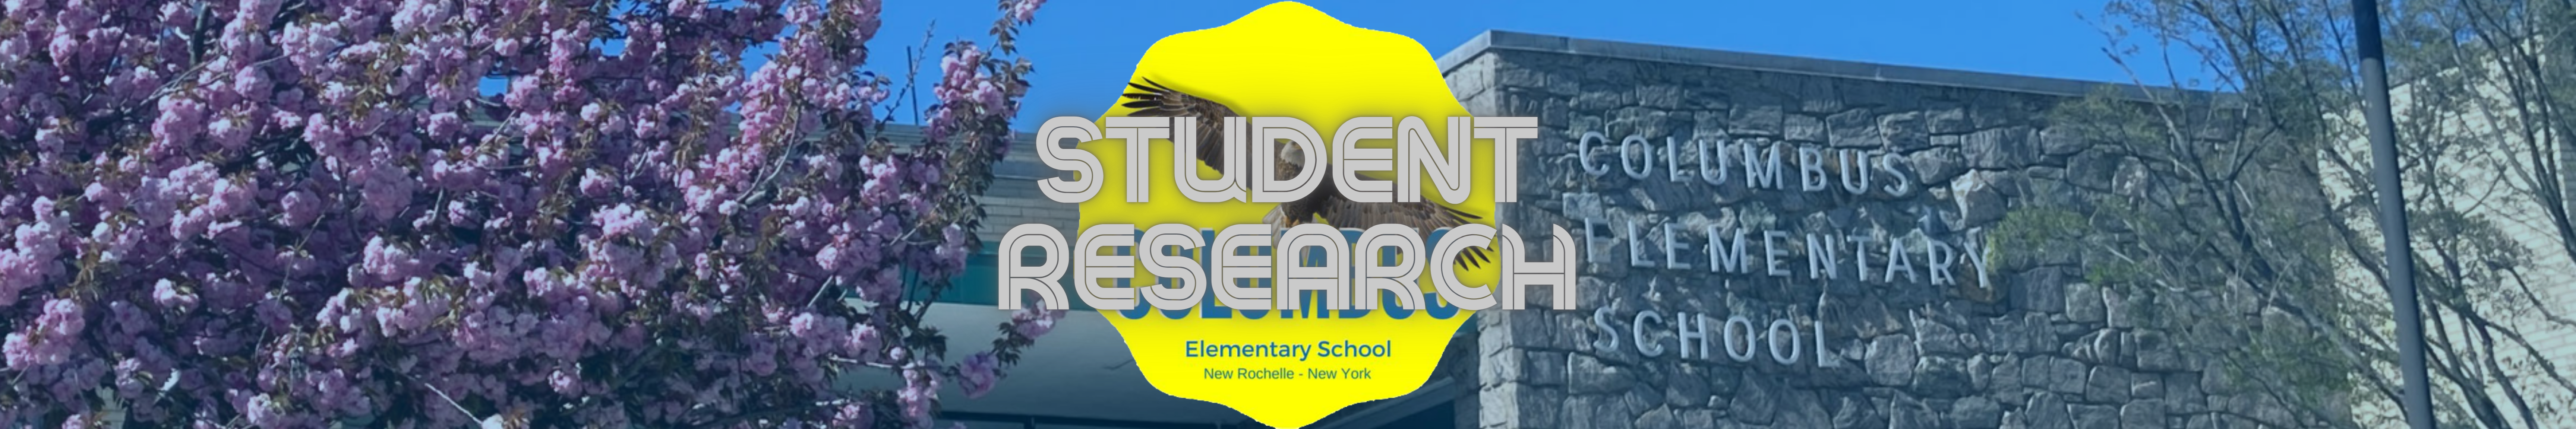 Student Research banner